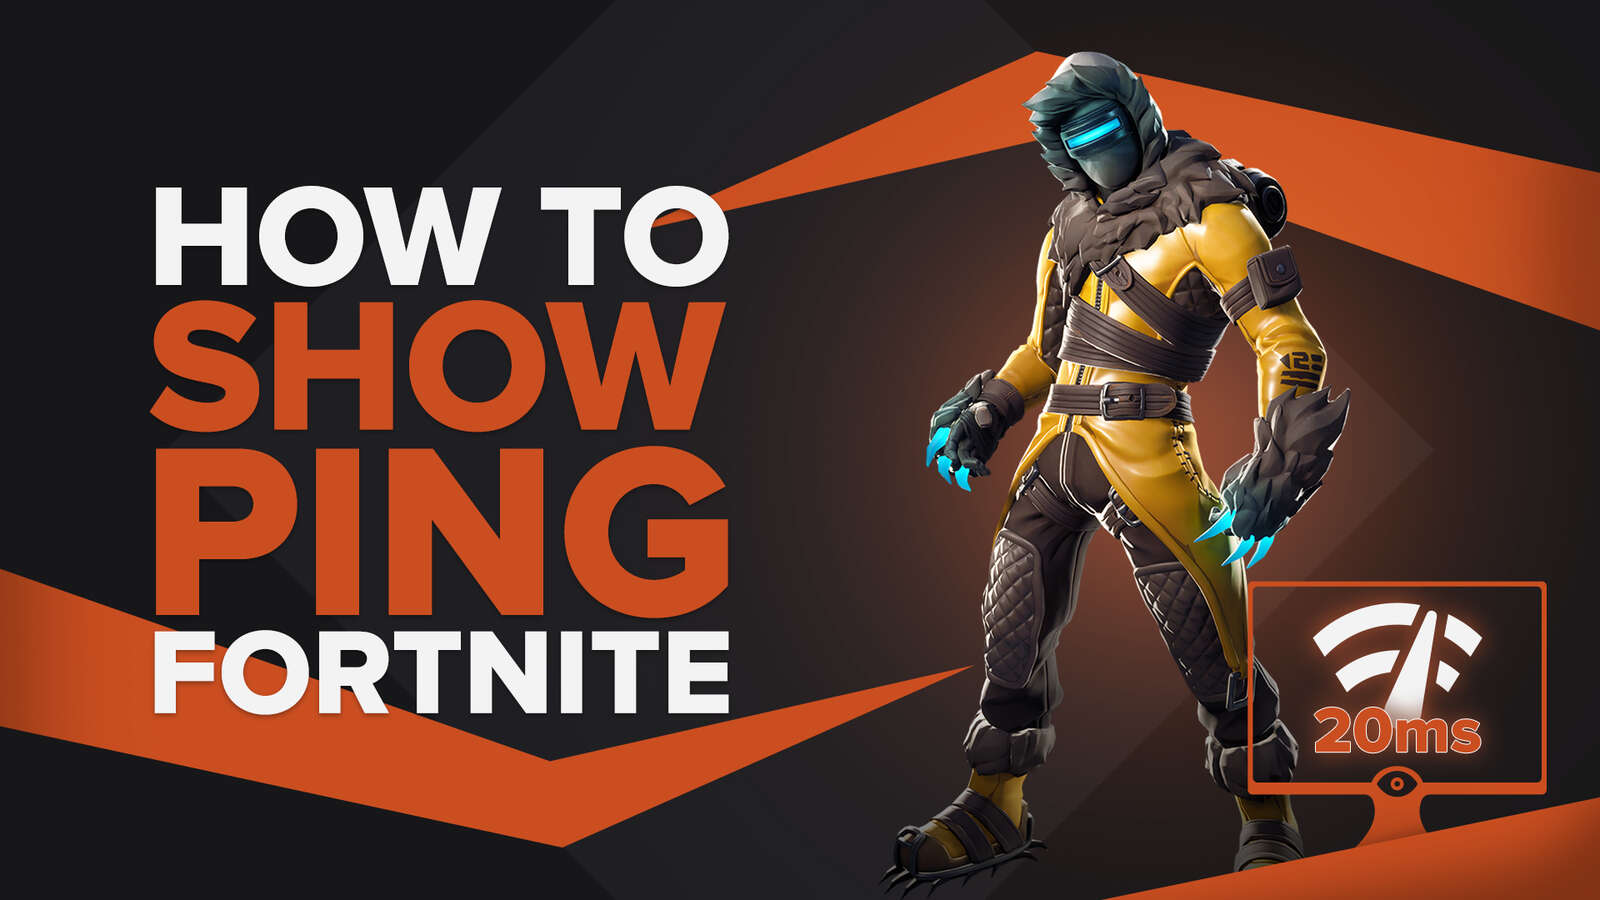 How To Show Your Ping in Fortnite